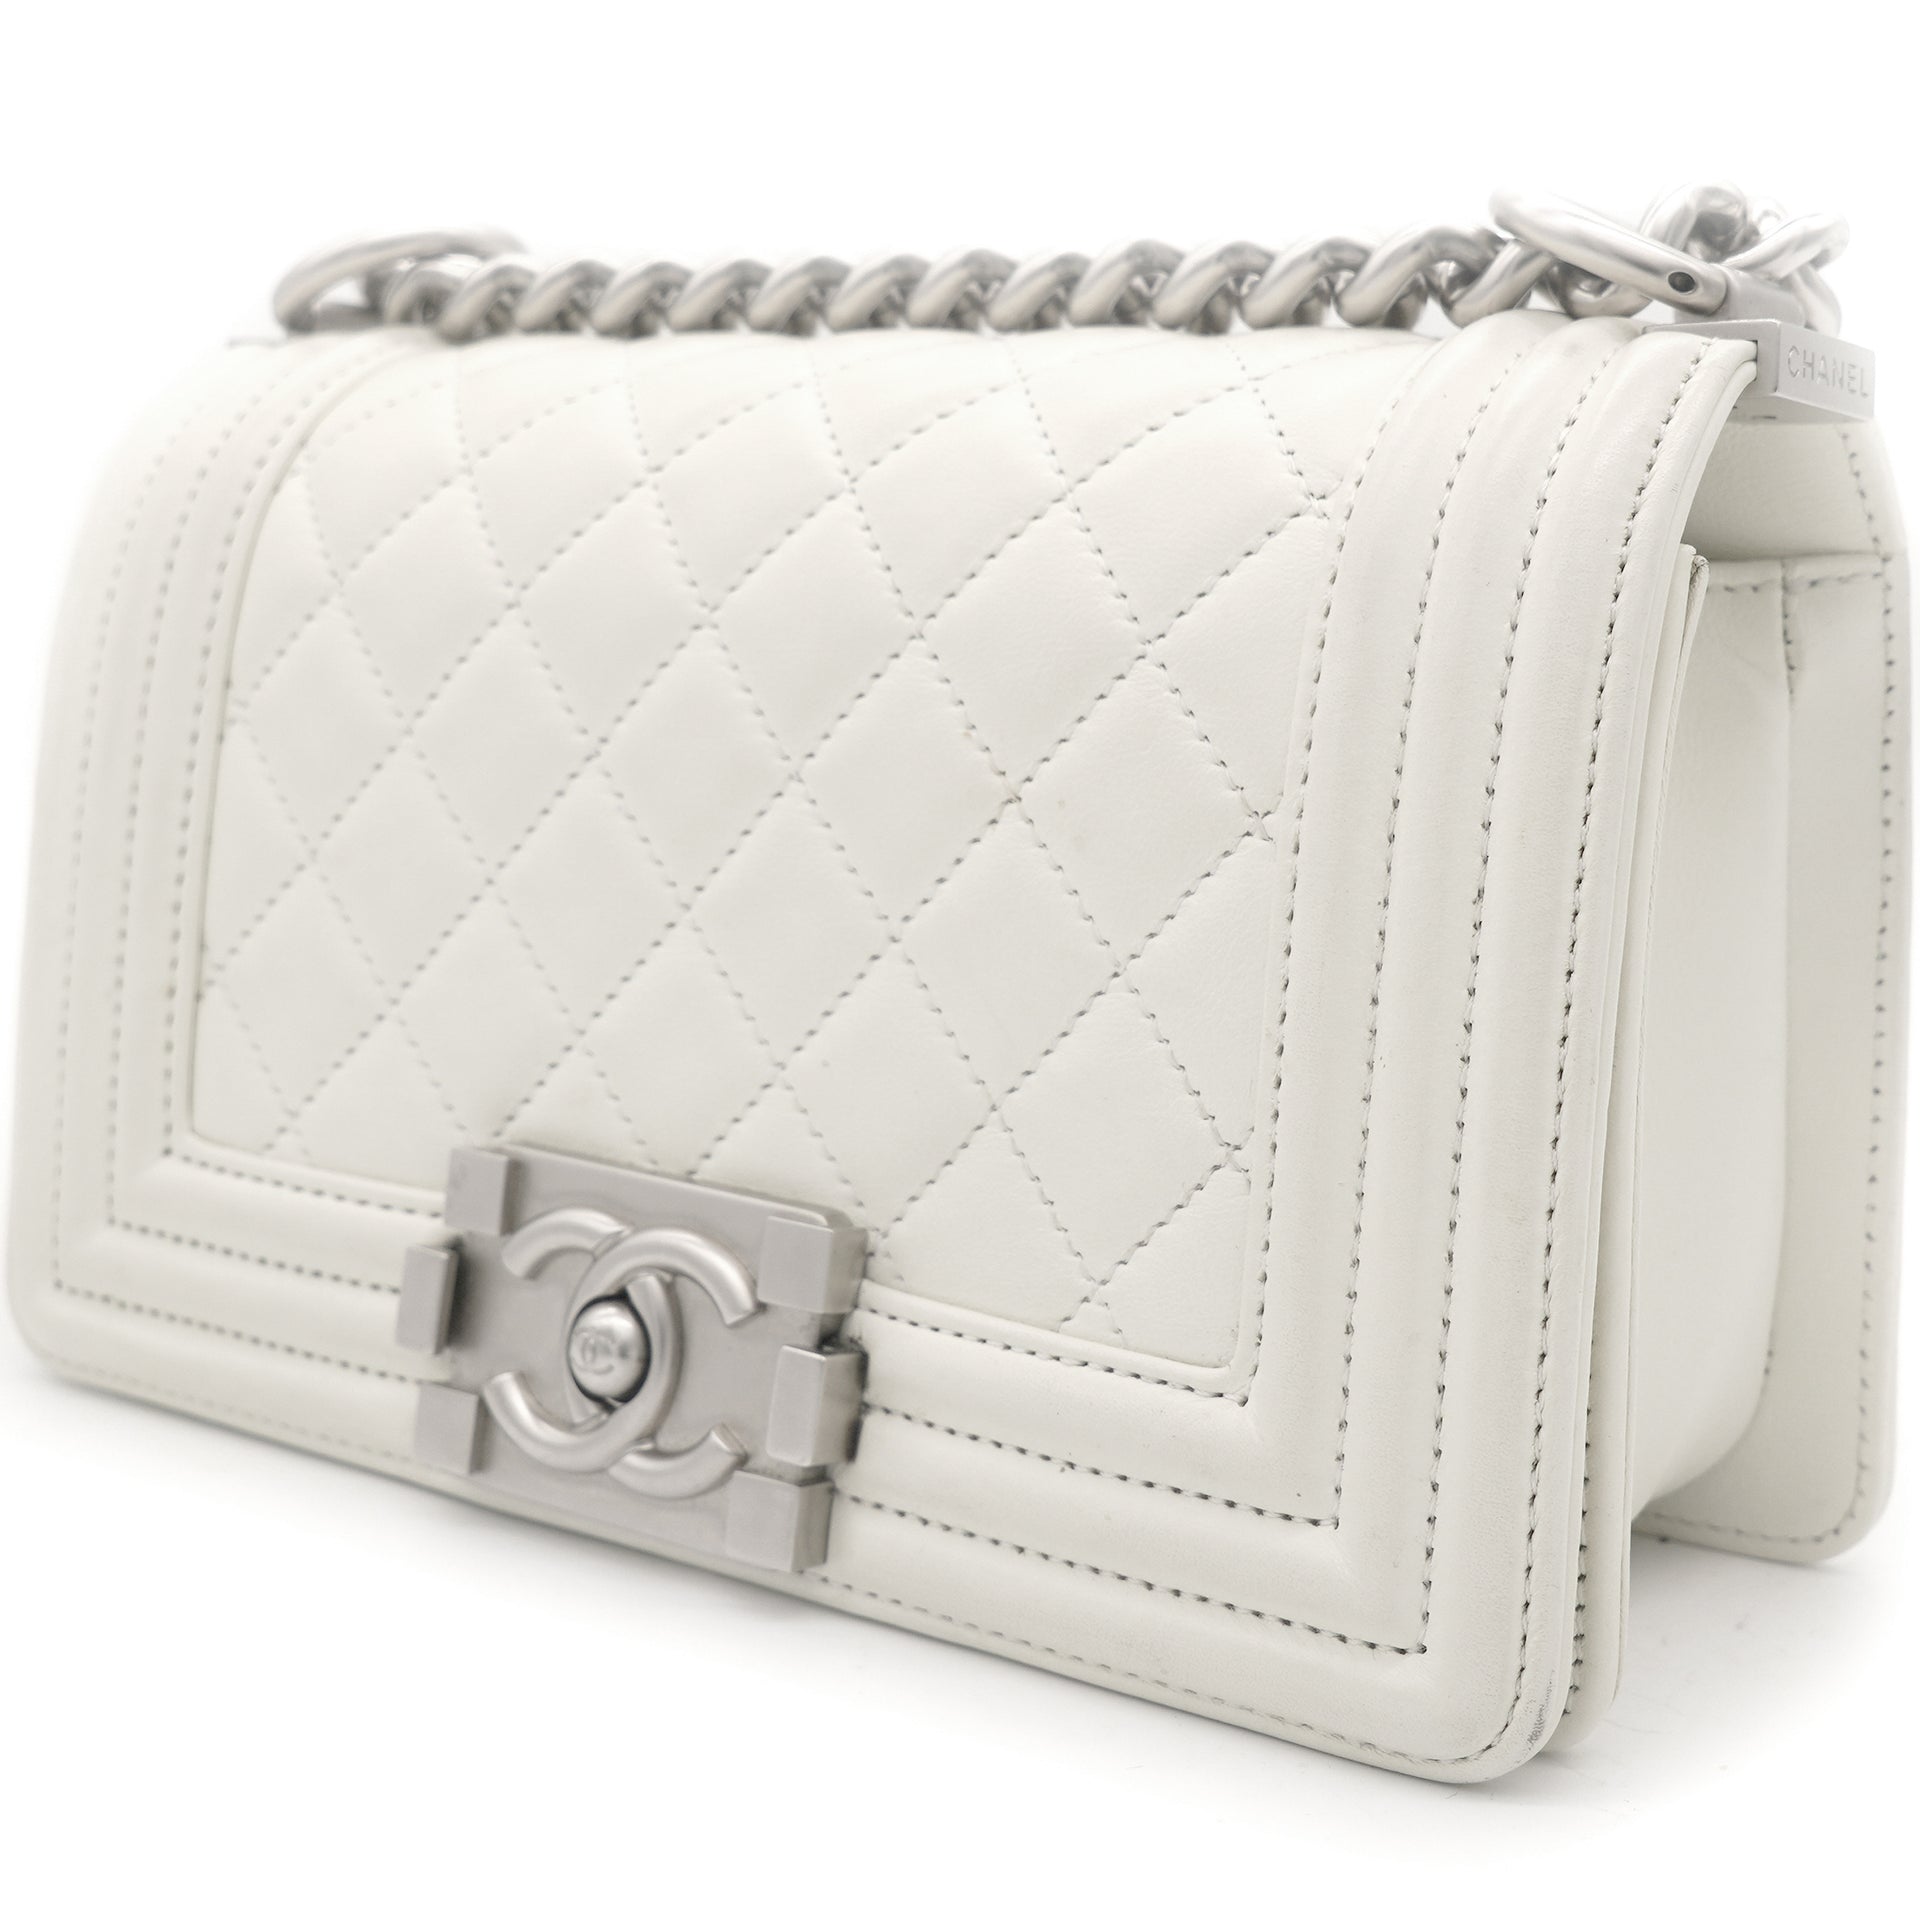 Calfskin Quilted Small Boy Flap White